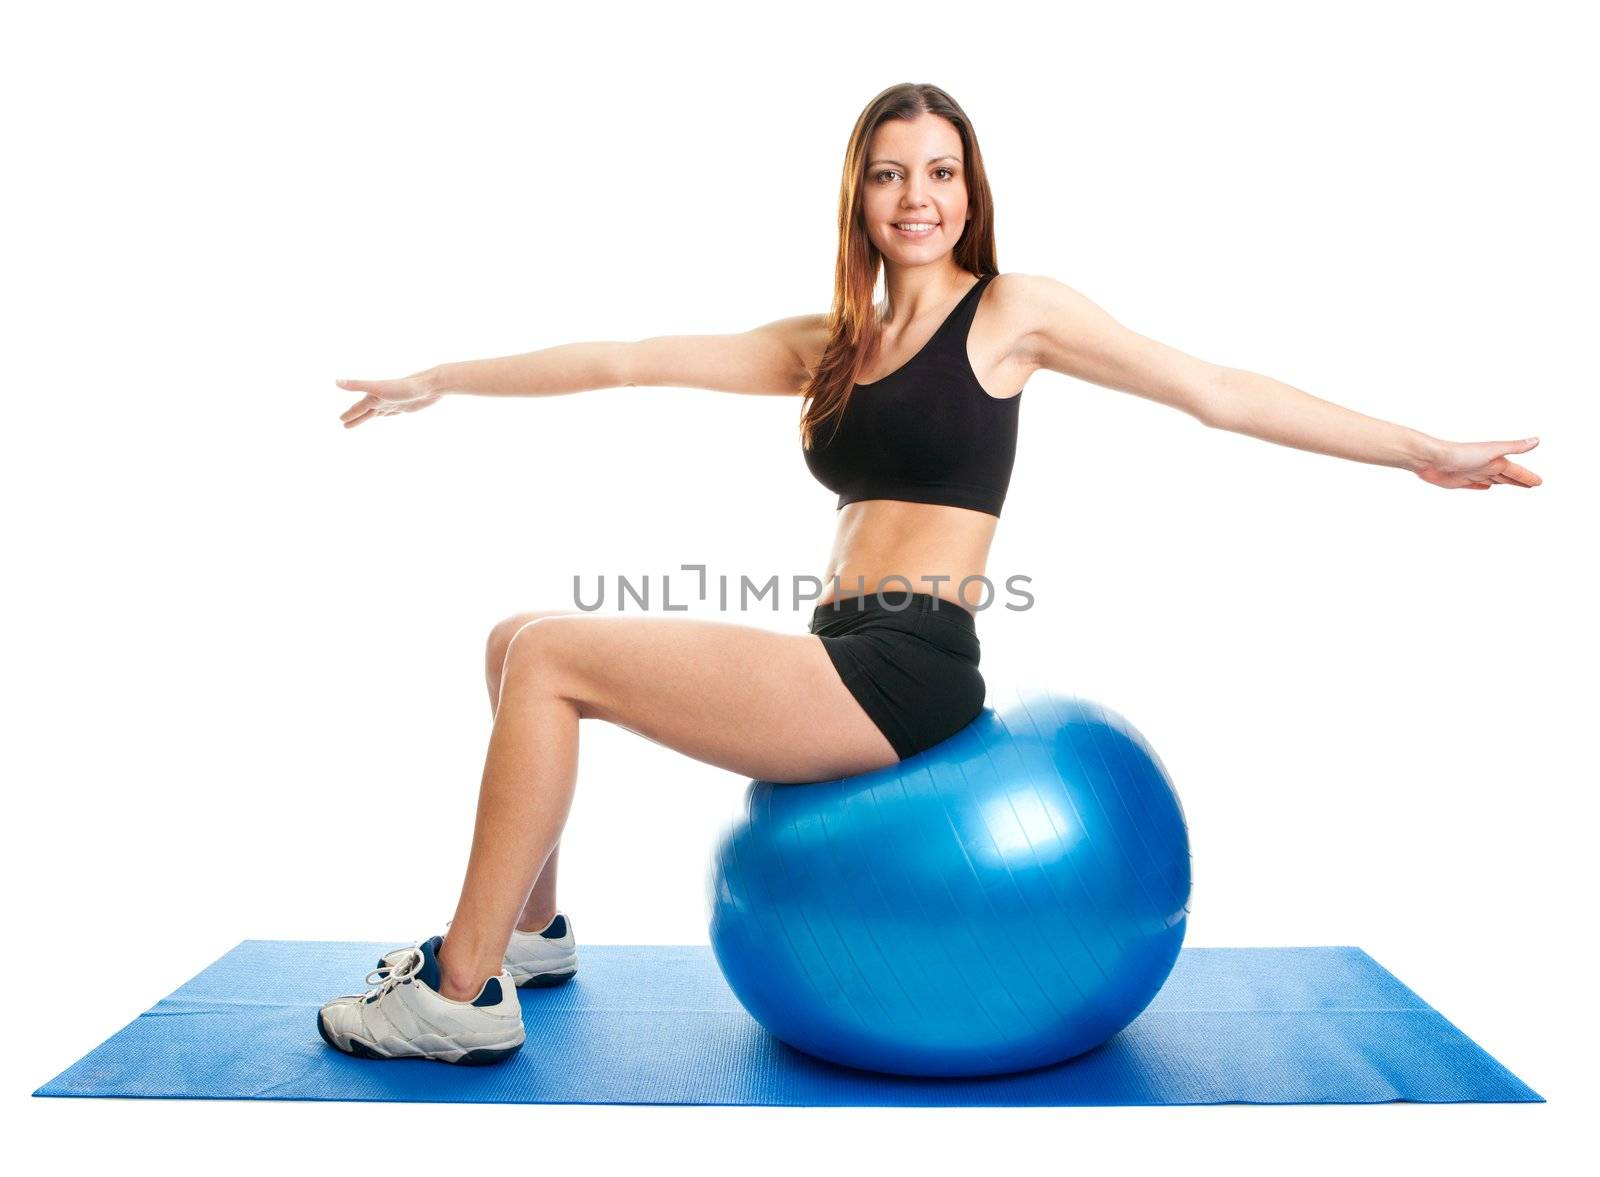 Fitness woman stretshing on fitness ball by AndreyPopov